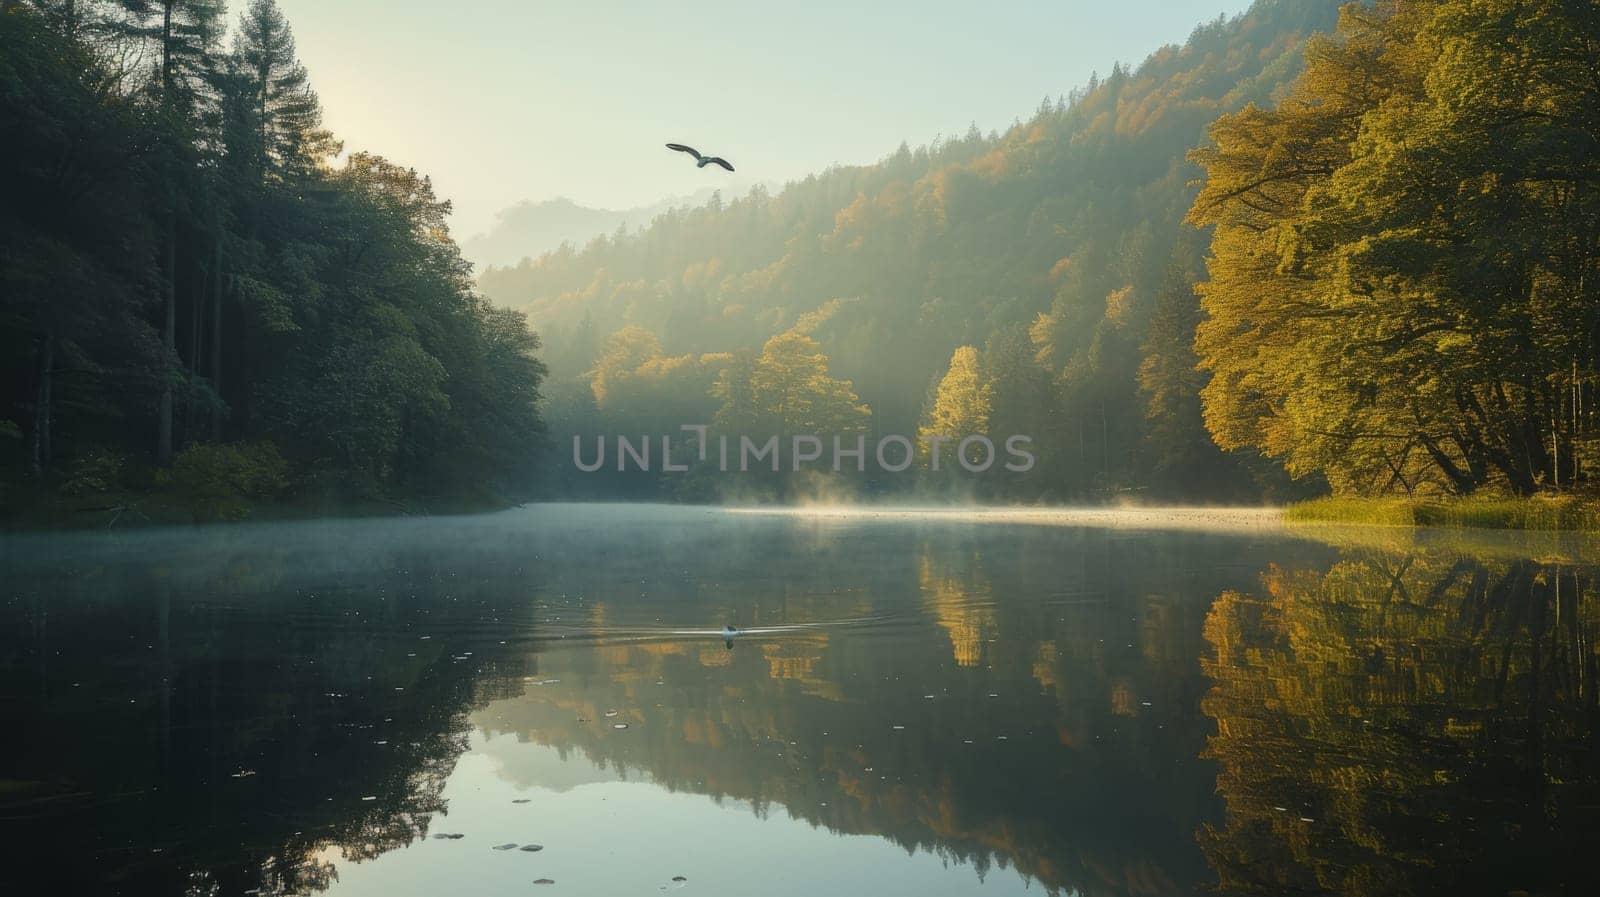 A lake with a bird flying over it and trees in the background